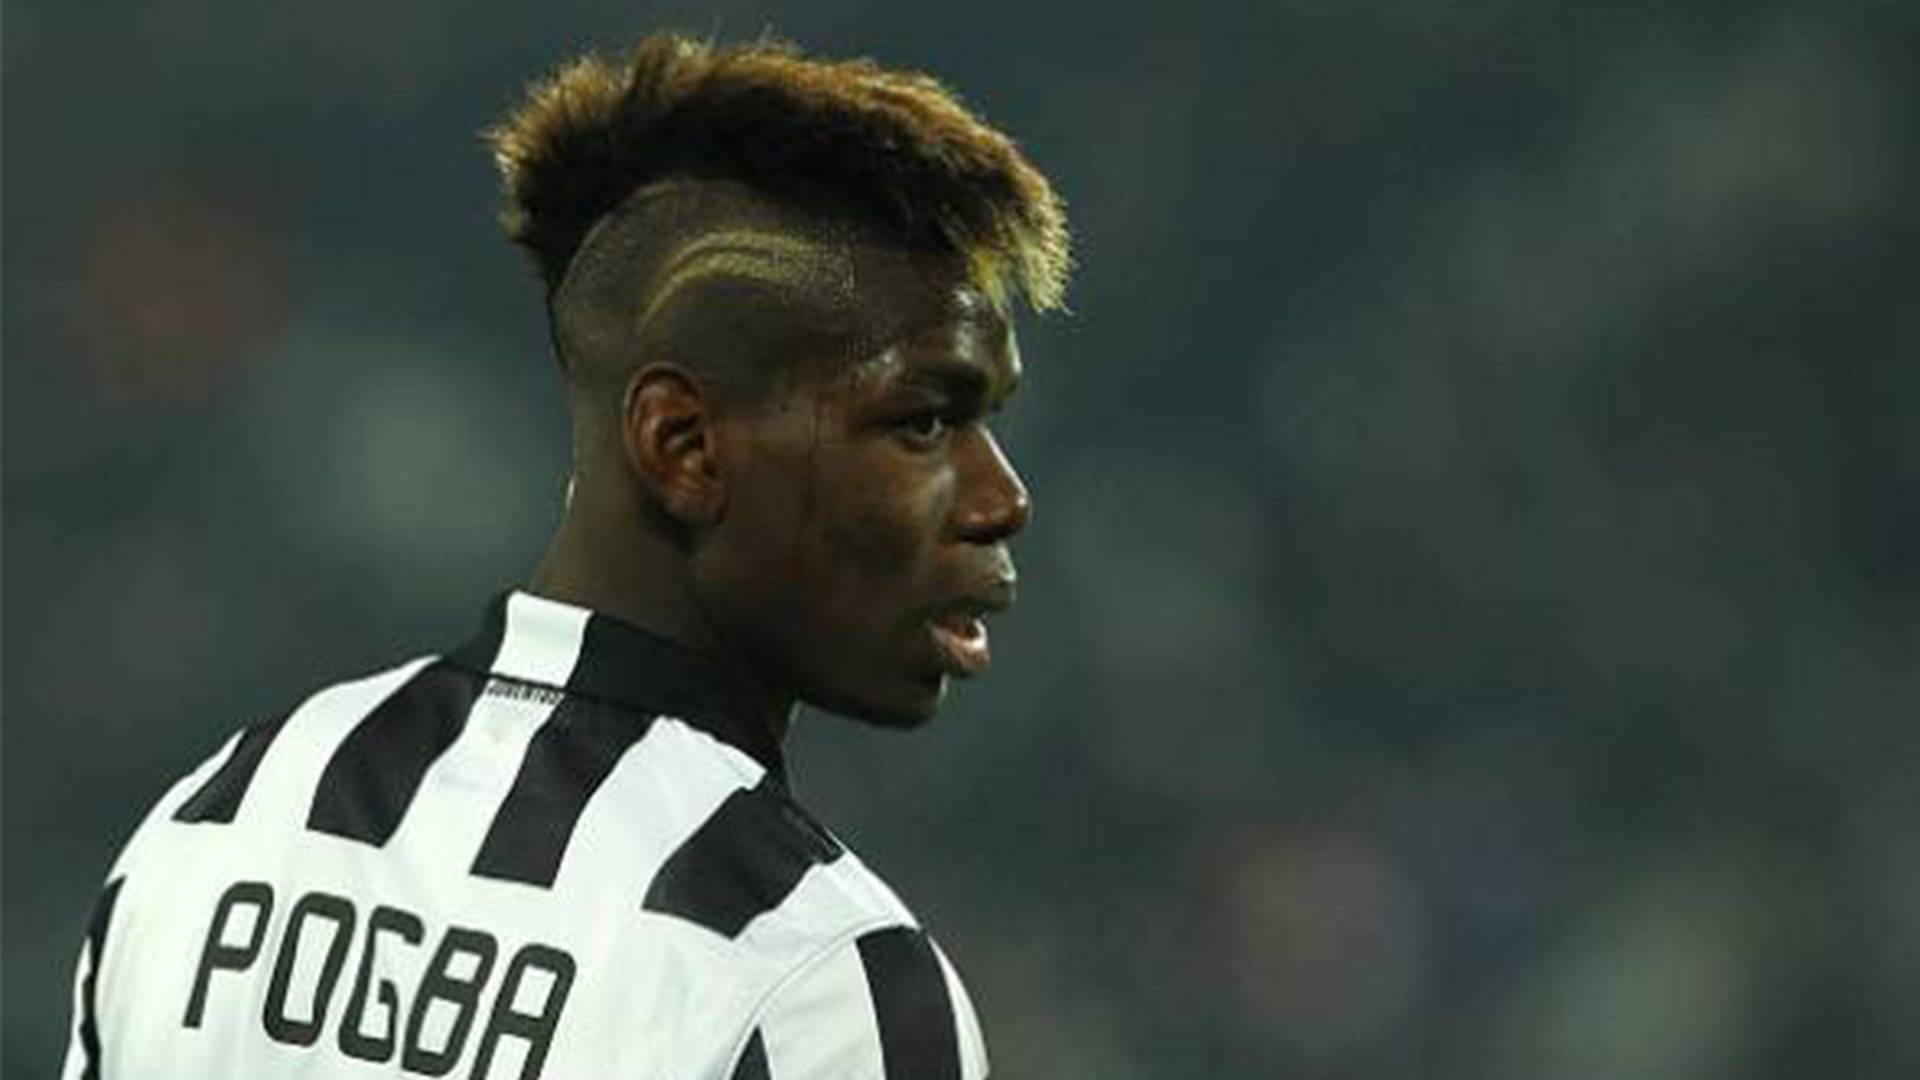 1920x1080 Paul Pogba New Hairstyle - Best Hairstyles Club